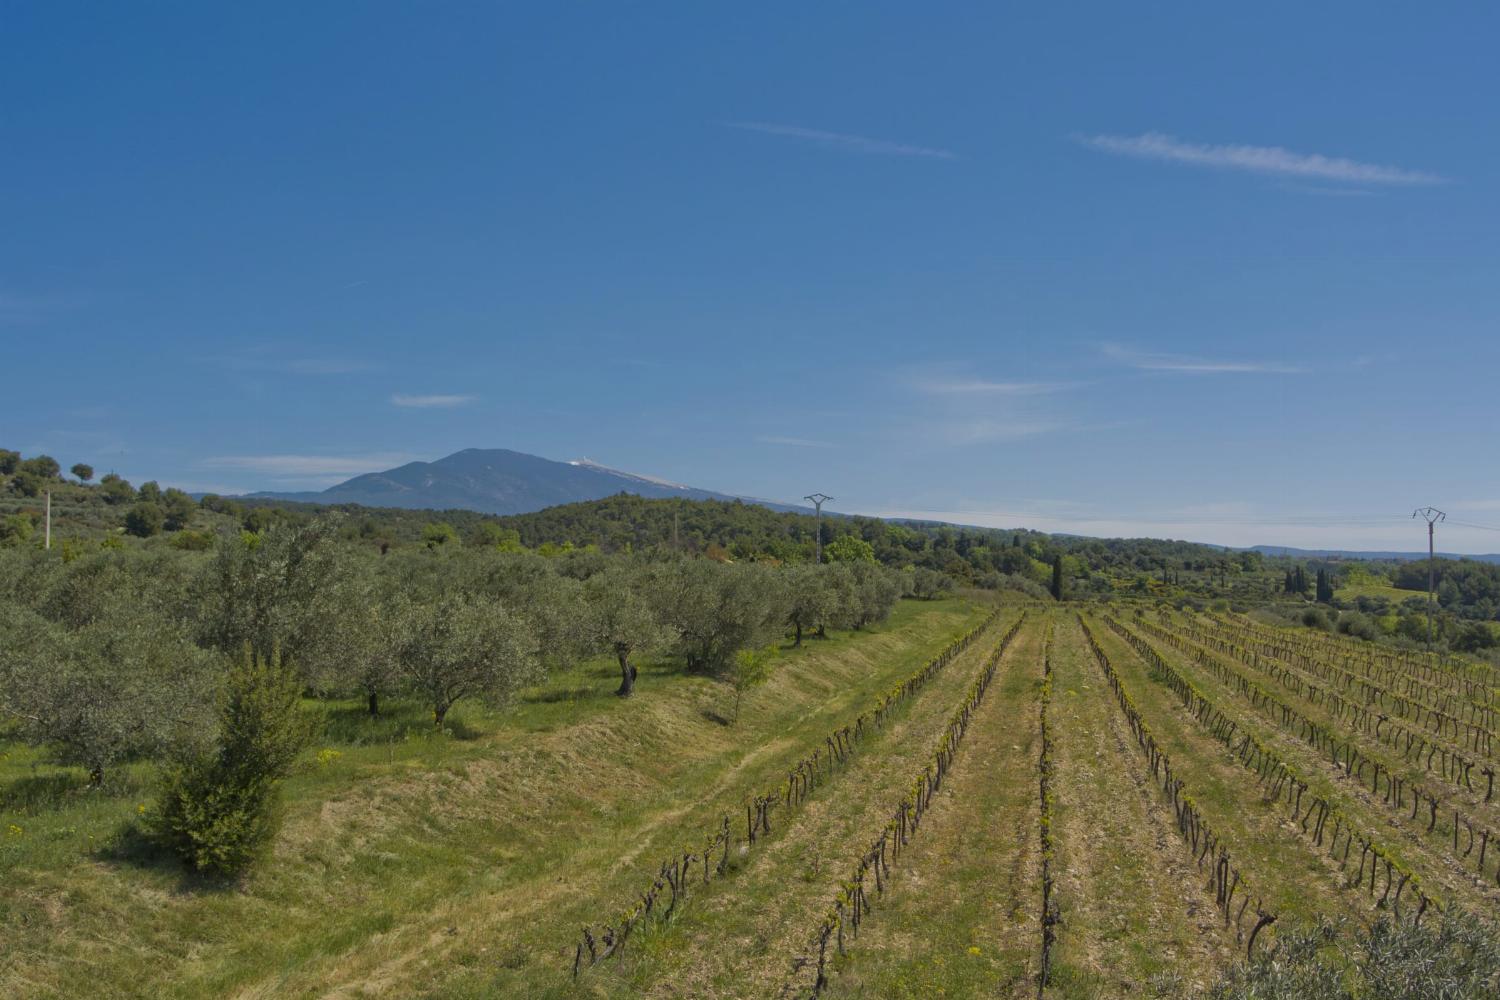 Vineyards in Provence